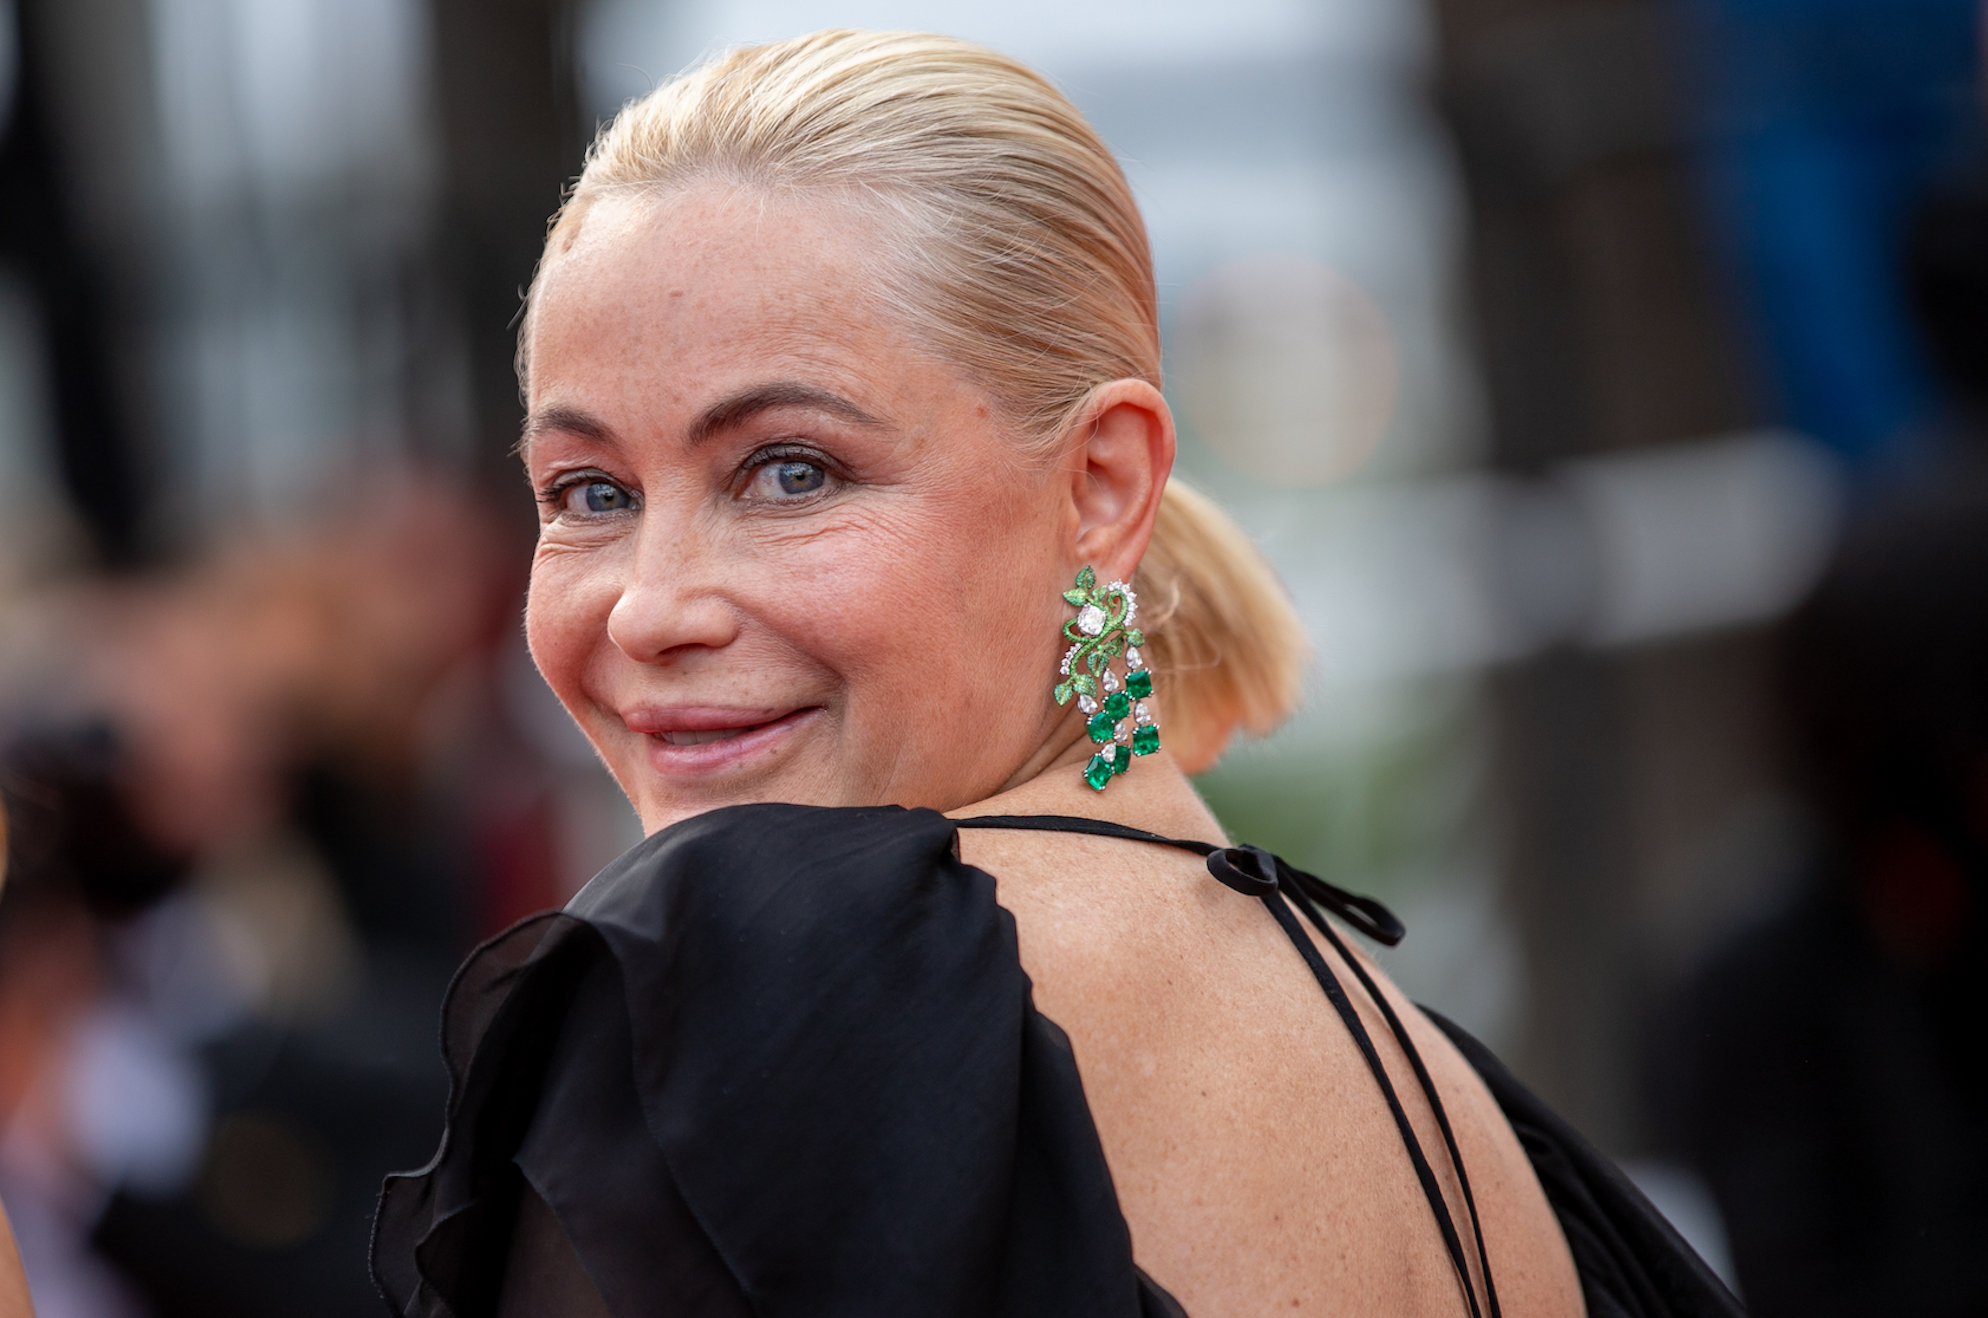 At Almost 60 Years Old Emmanuelle Béart Confides In Her Relationship